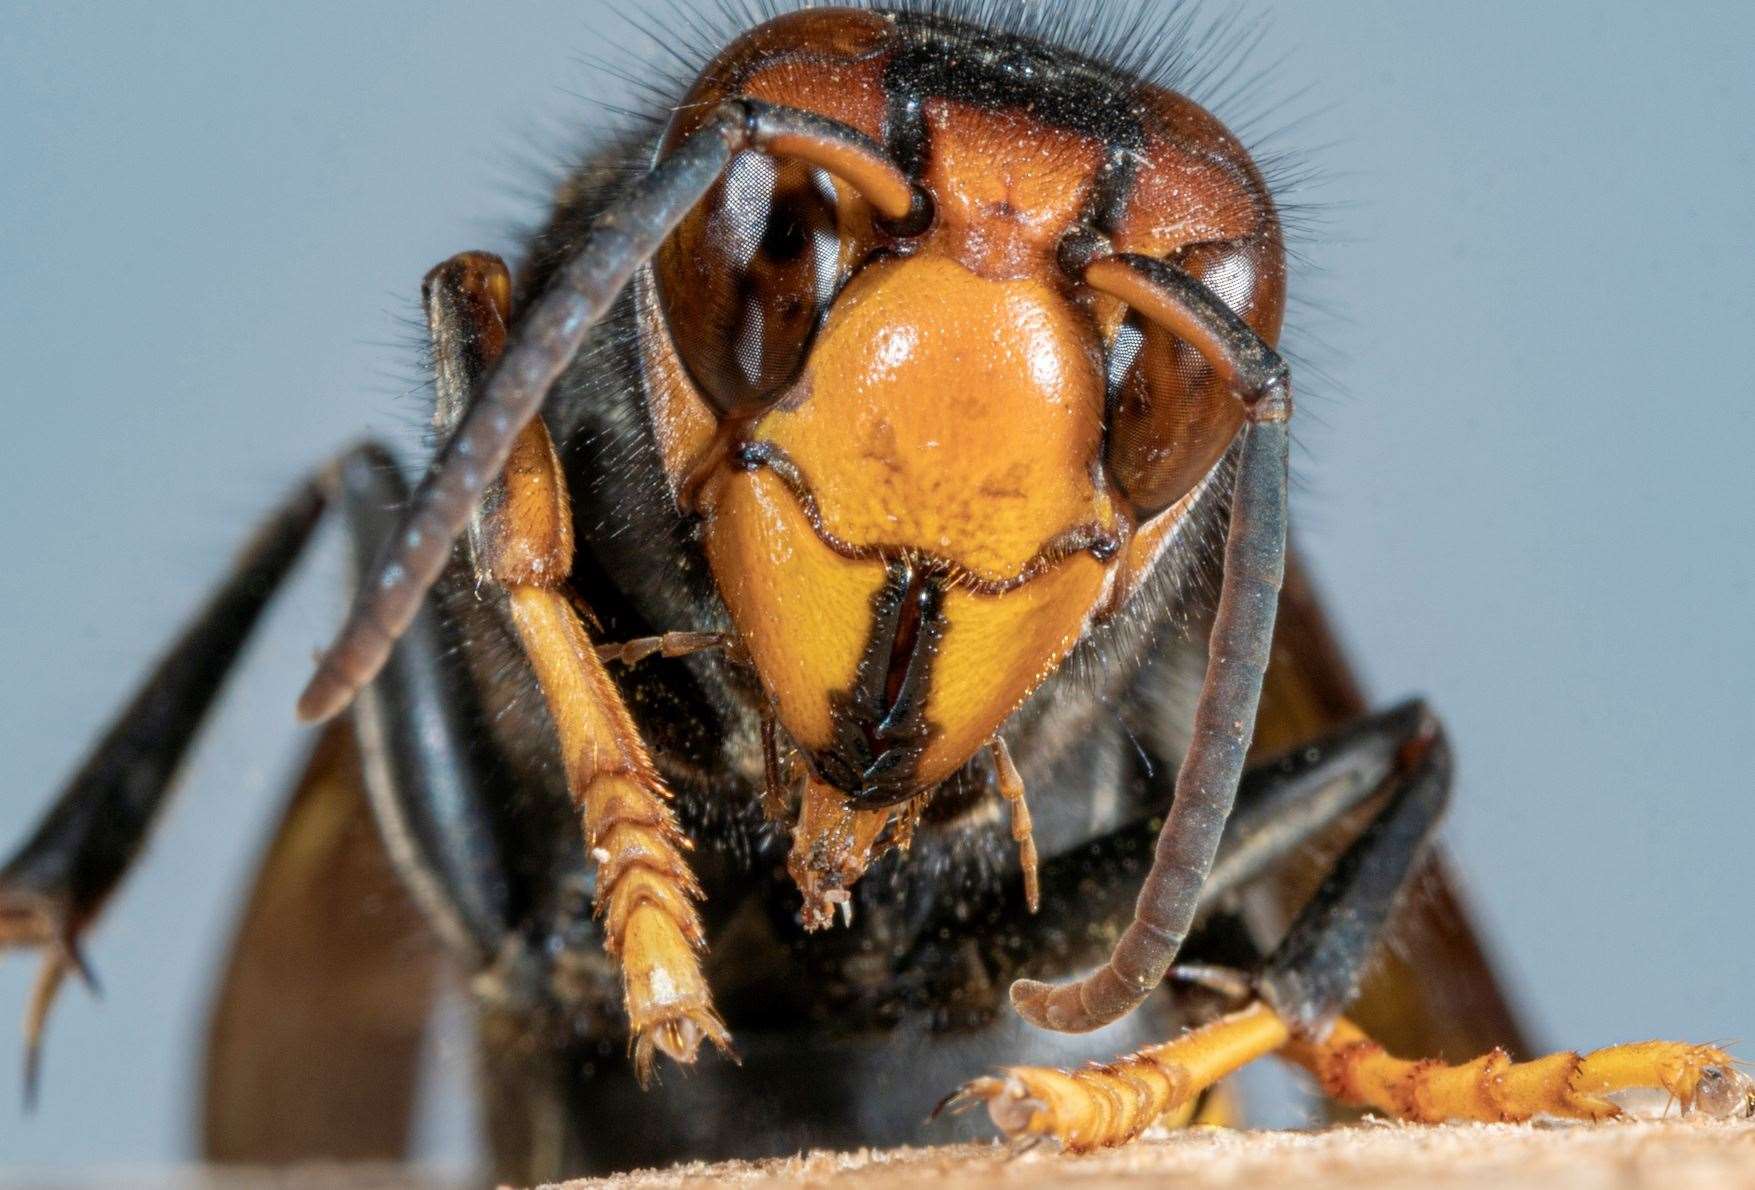 The Asian hornet is now well established in many European countries. Image: iStock.